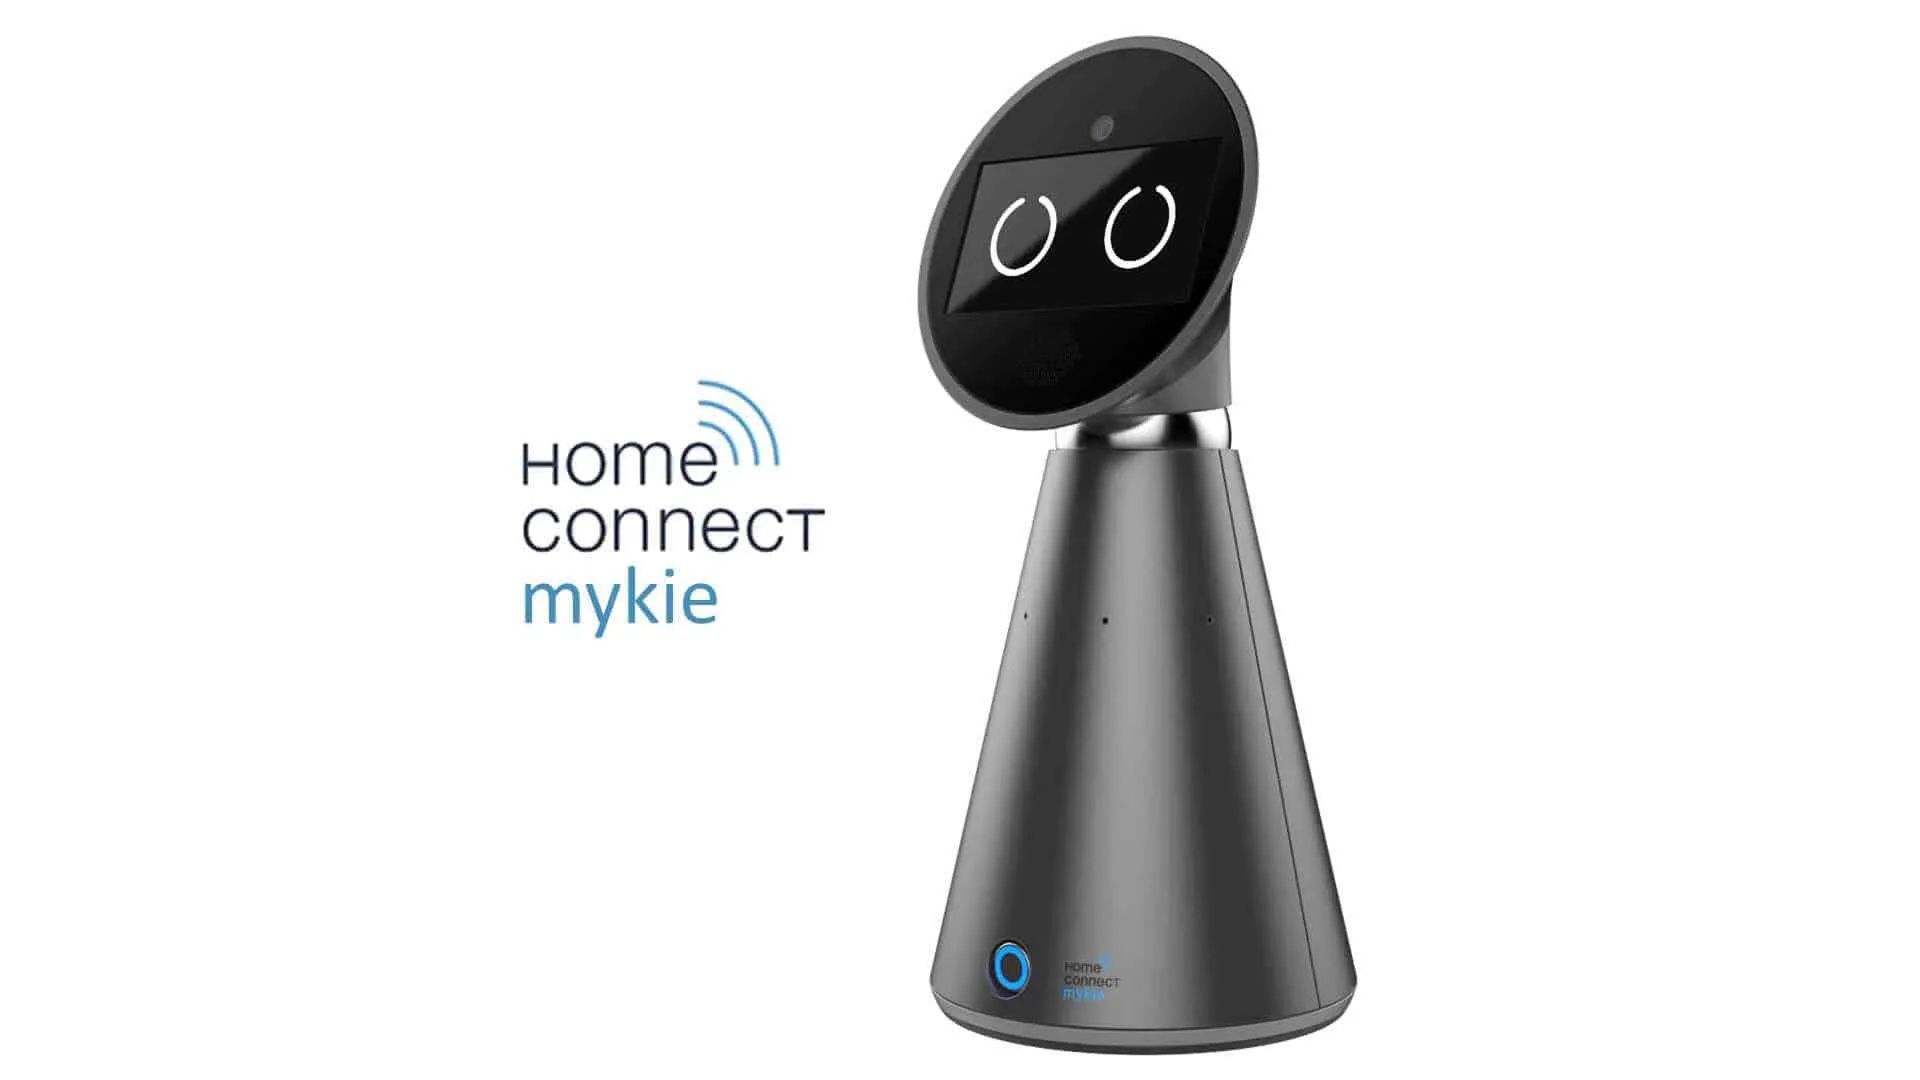 Bosch Mykie uses voice-recognition and connects with all Bosch smart kitchen appliances